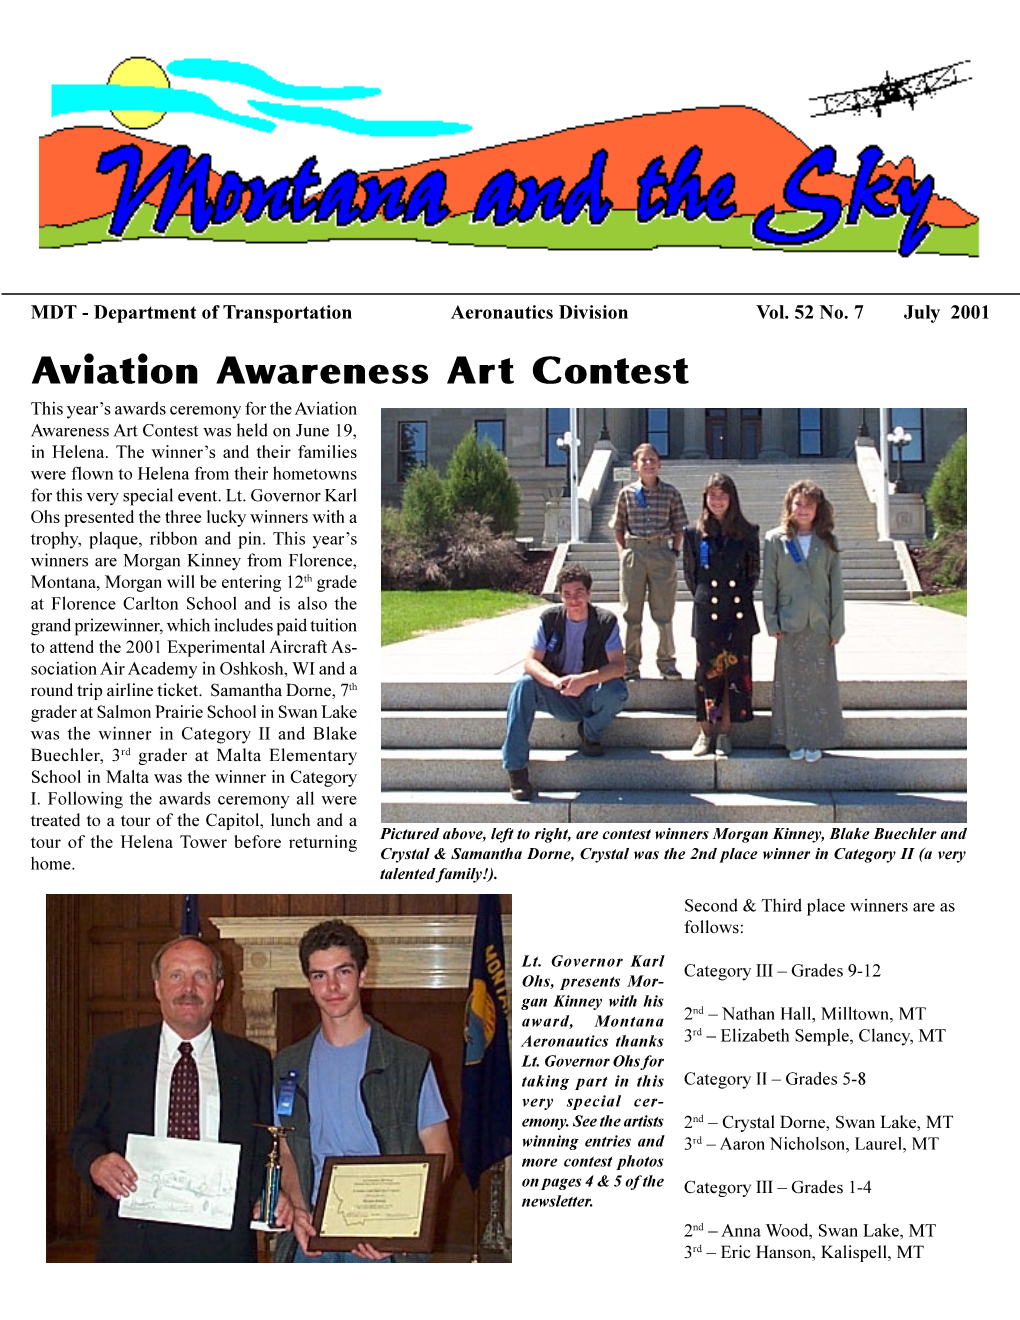 Aviation Awareness Art Contest This Year’S Awards Ceremony for the Aviation Awareness Art Contest Was Held on June 19, in Helena